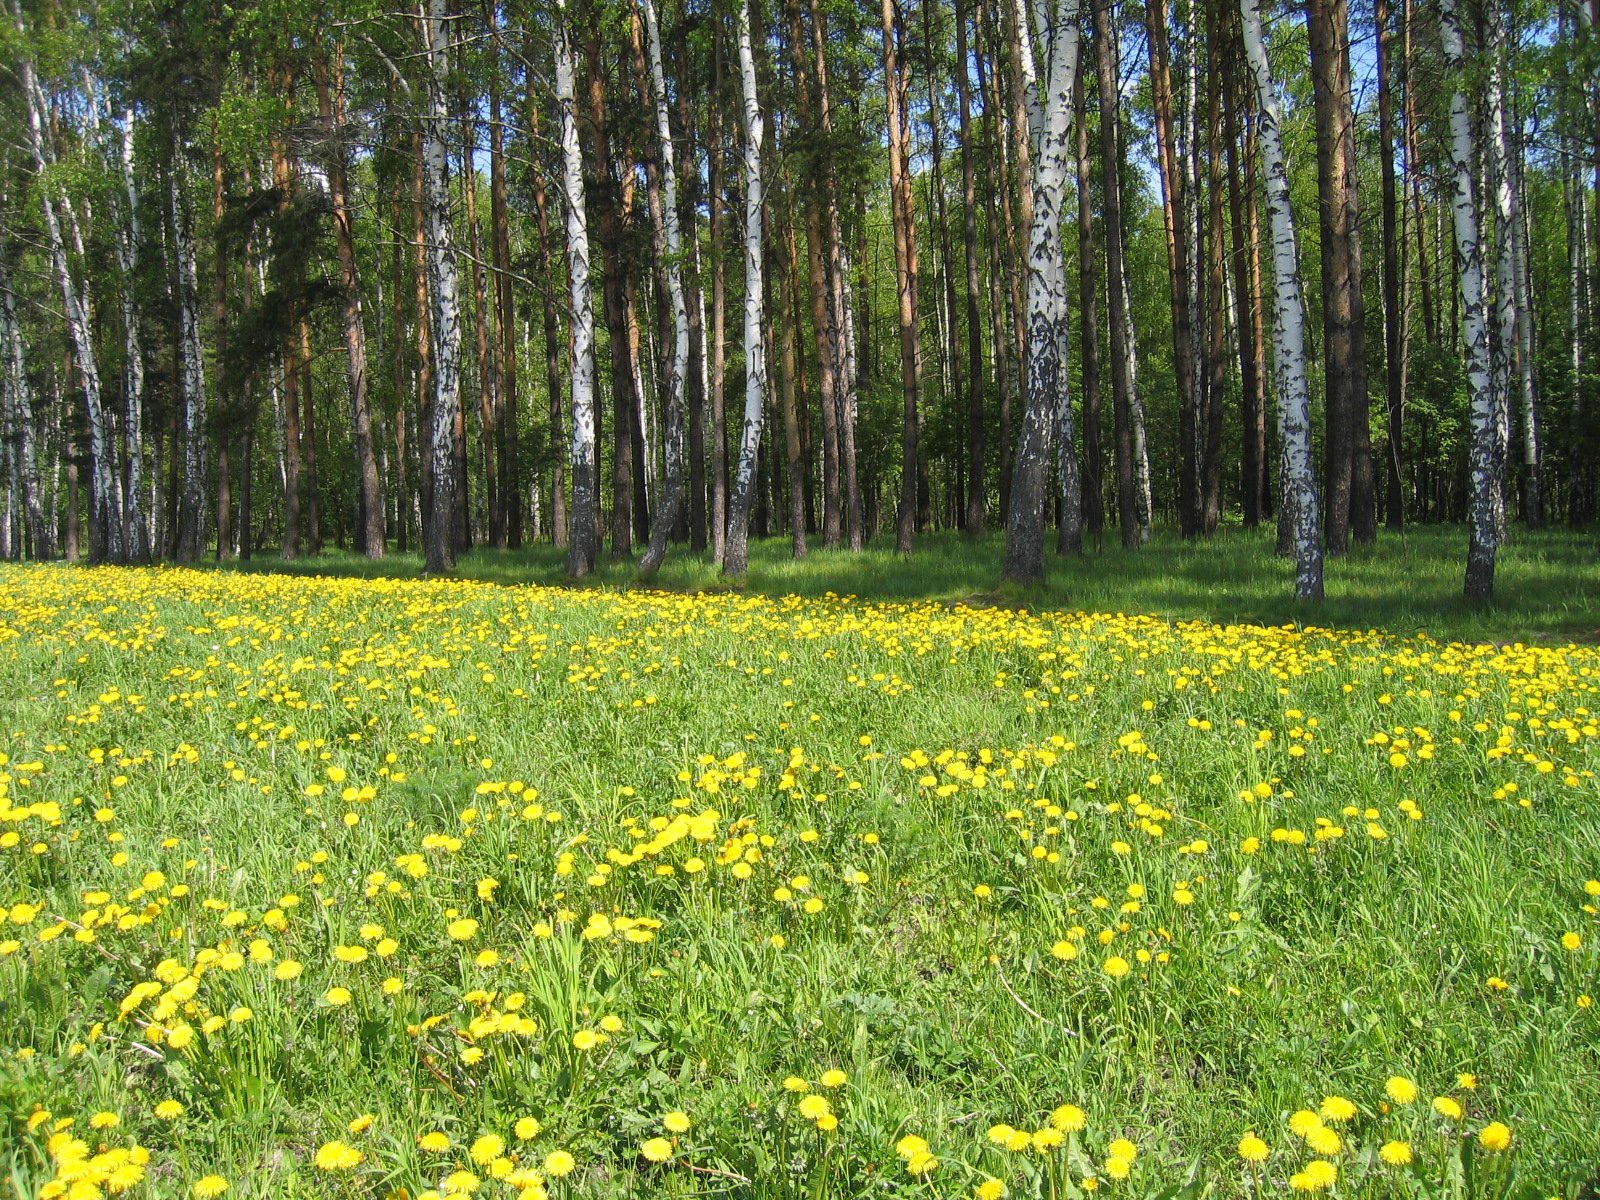 an open field of grass and flowers is surrounded by tall trees